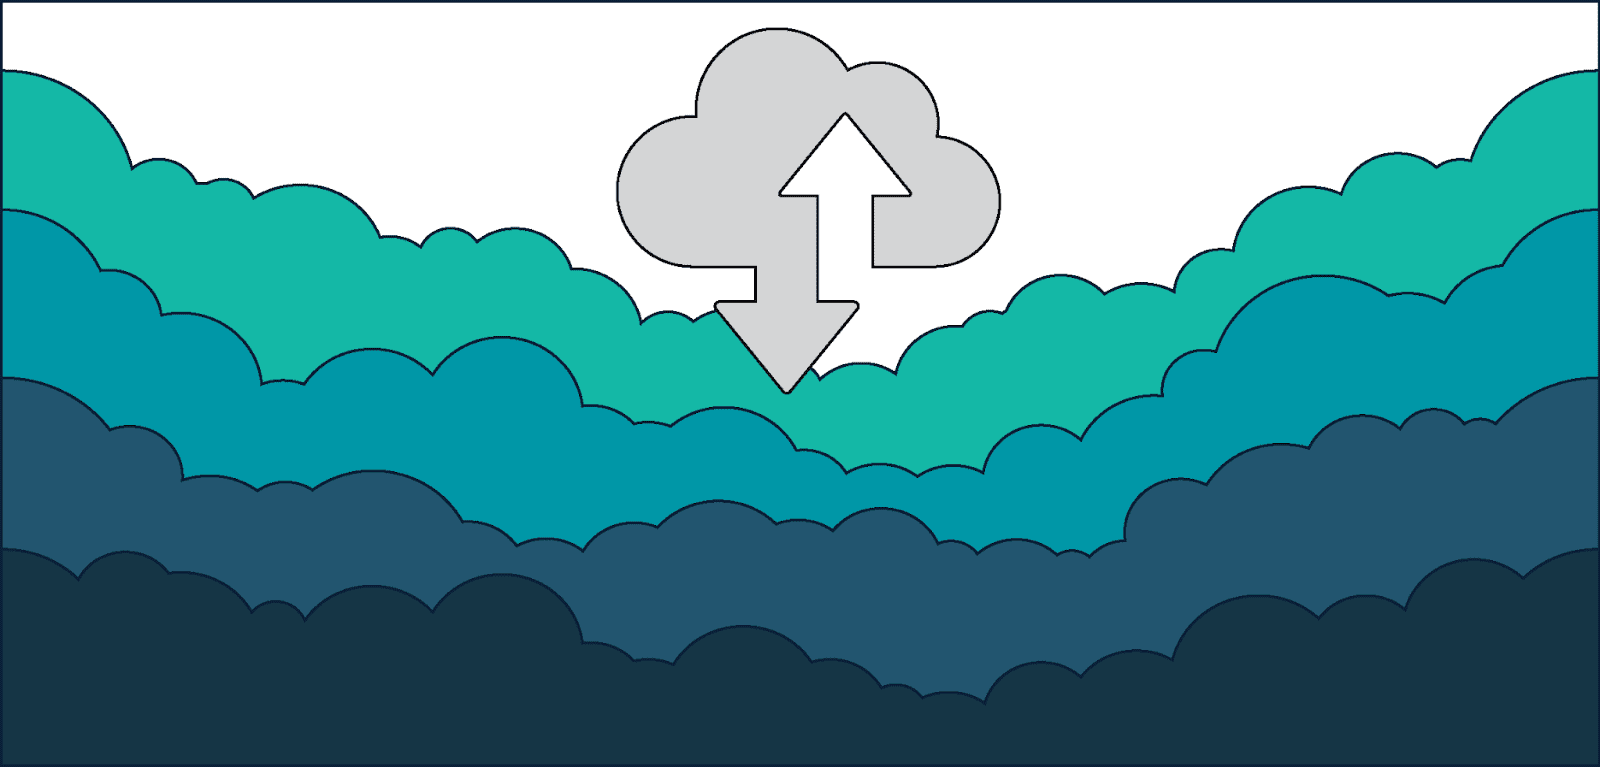 icon of a data storage cloud floating over an illustration of a field of clouds